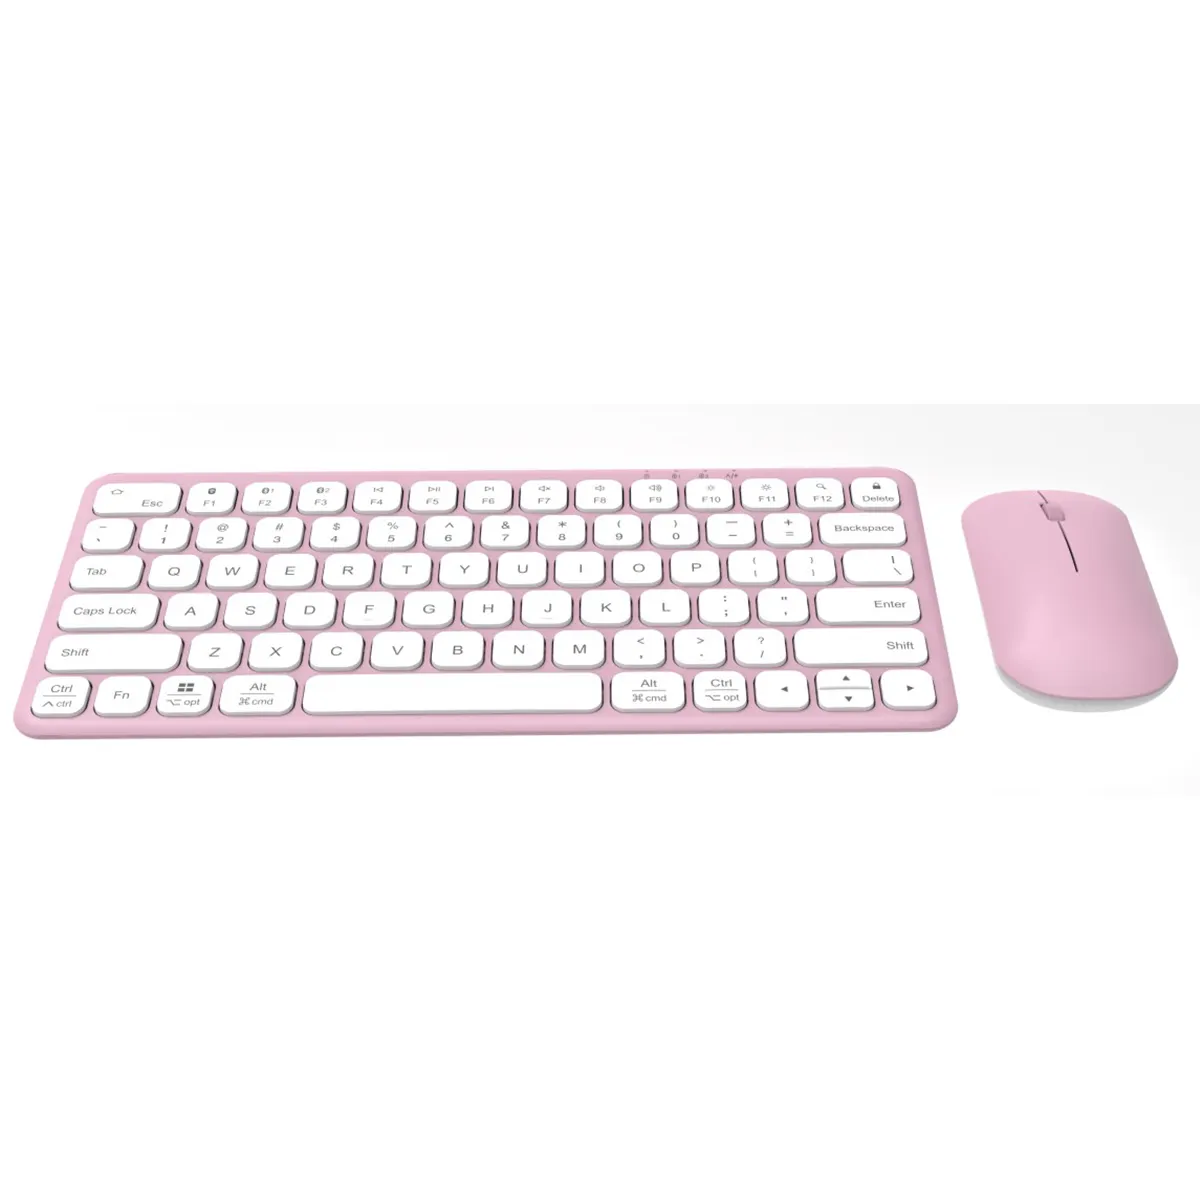 B087 Wireless Keyboard and Mouse For Apple Teclado iPad smart Phone Tablet Wireless Keyboard For Android IOS Wind